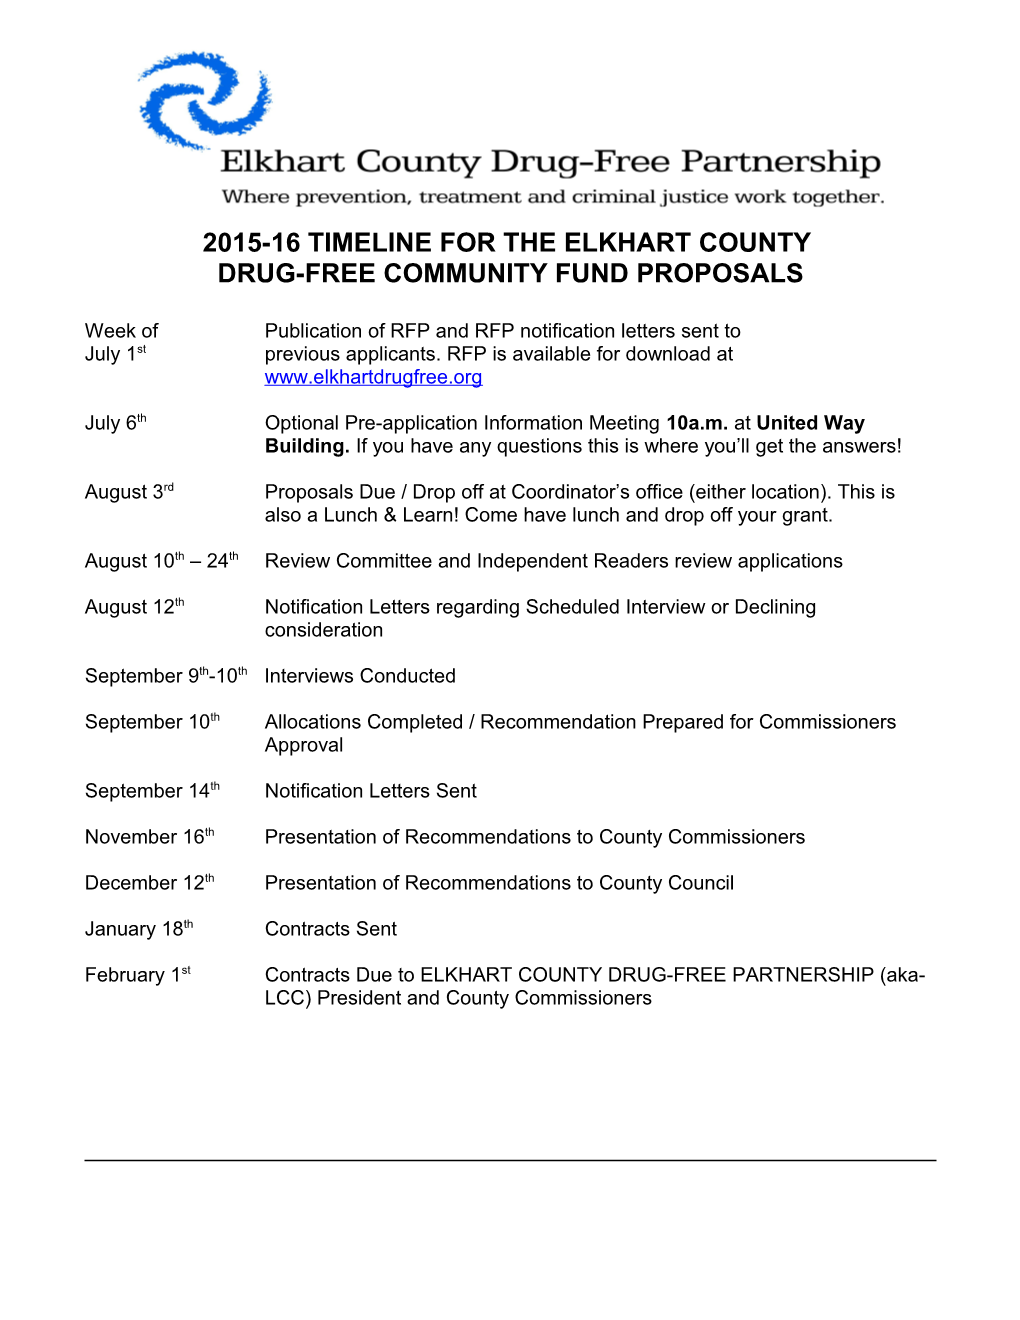 2015-16 Timeline for the Elkhart County